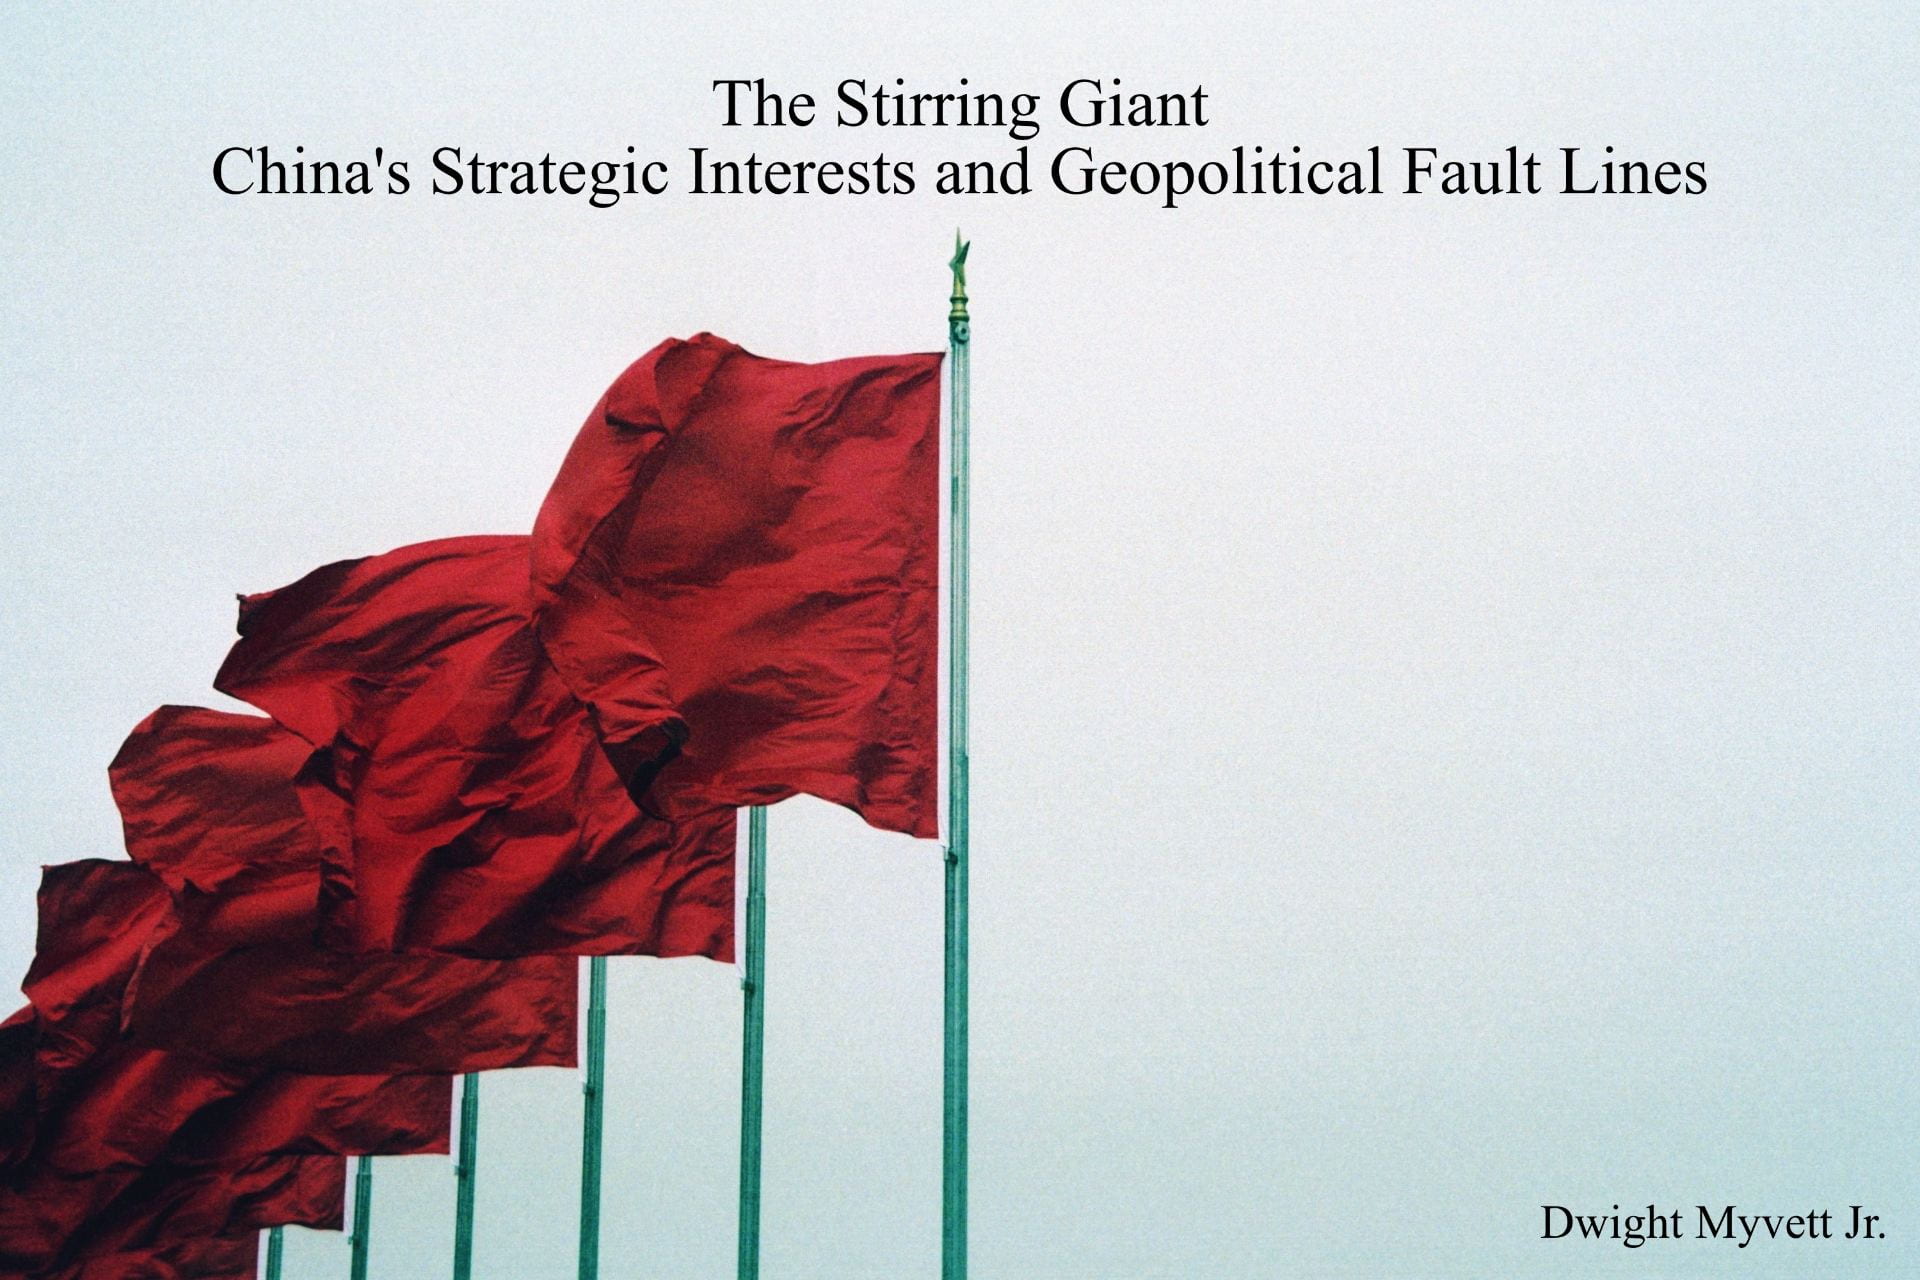 The Stirring Giant: China's Strategic Interests and Geopolitical Fault Lines